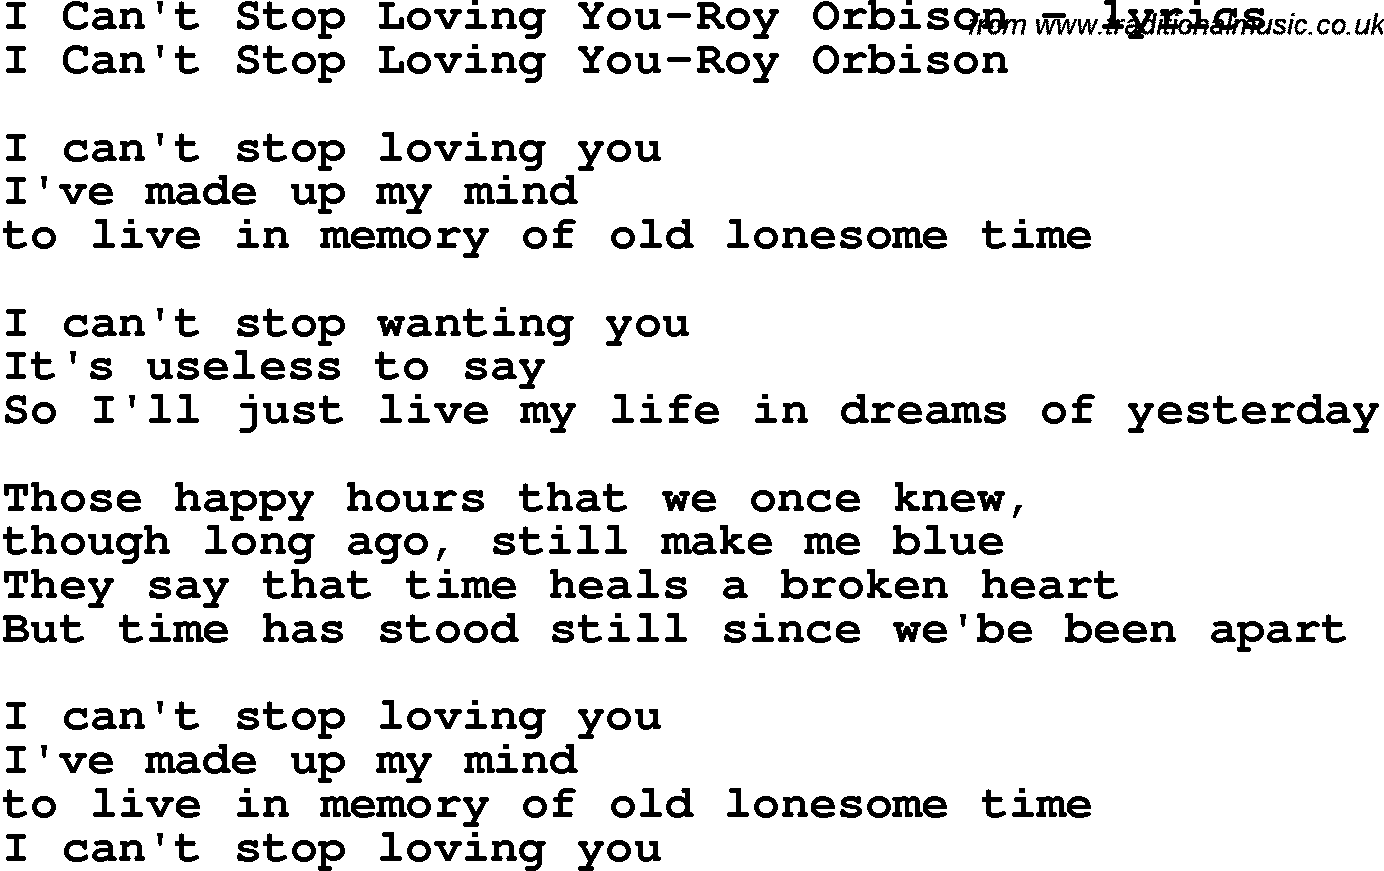 Love Song Lyrics for: I Can't Stop Loving You-Roy Orbison